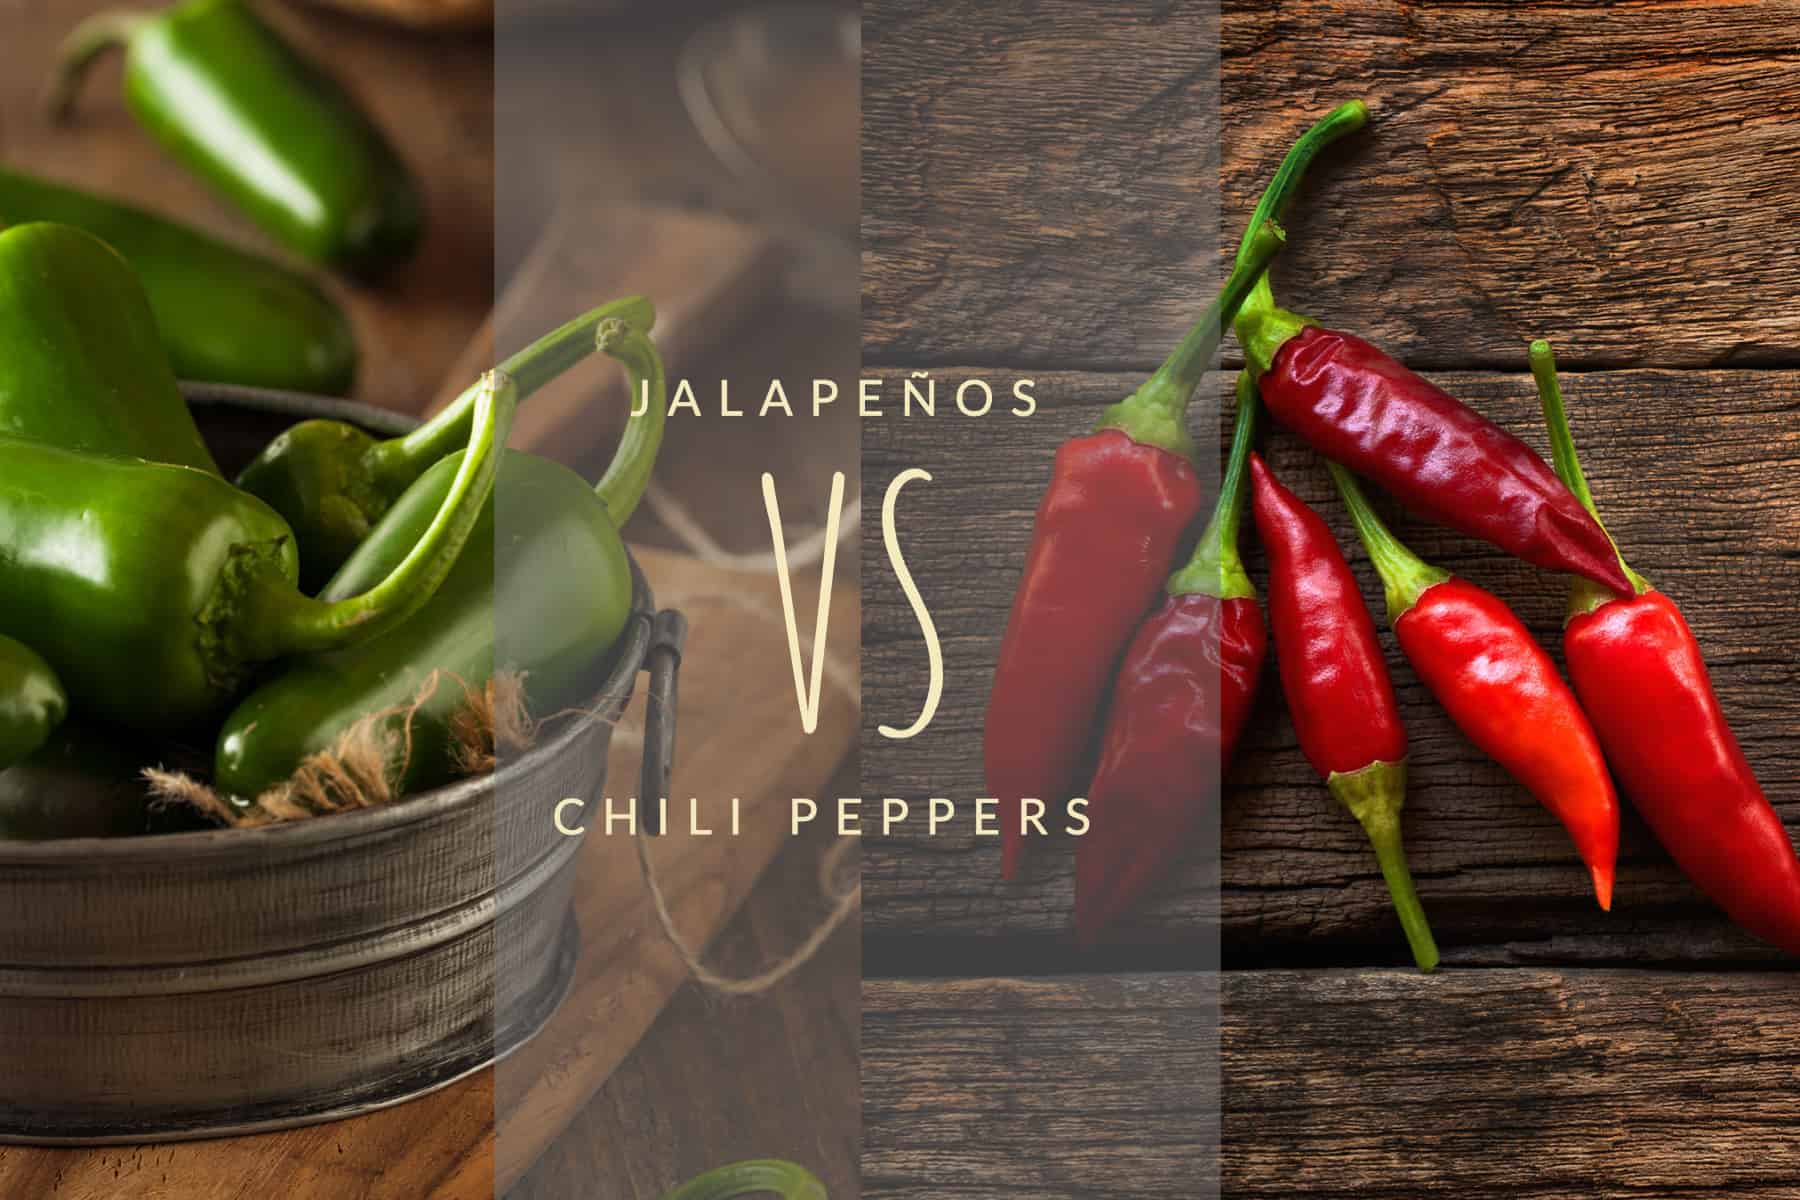 Jalapeños and chili peppers next to each other 